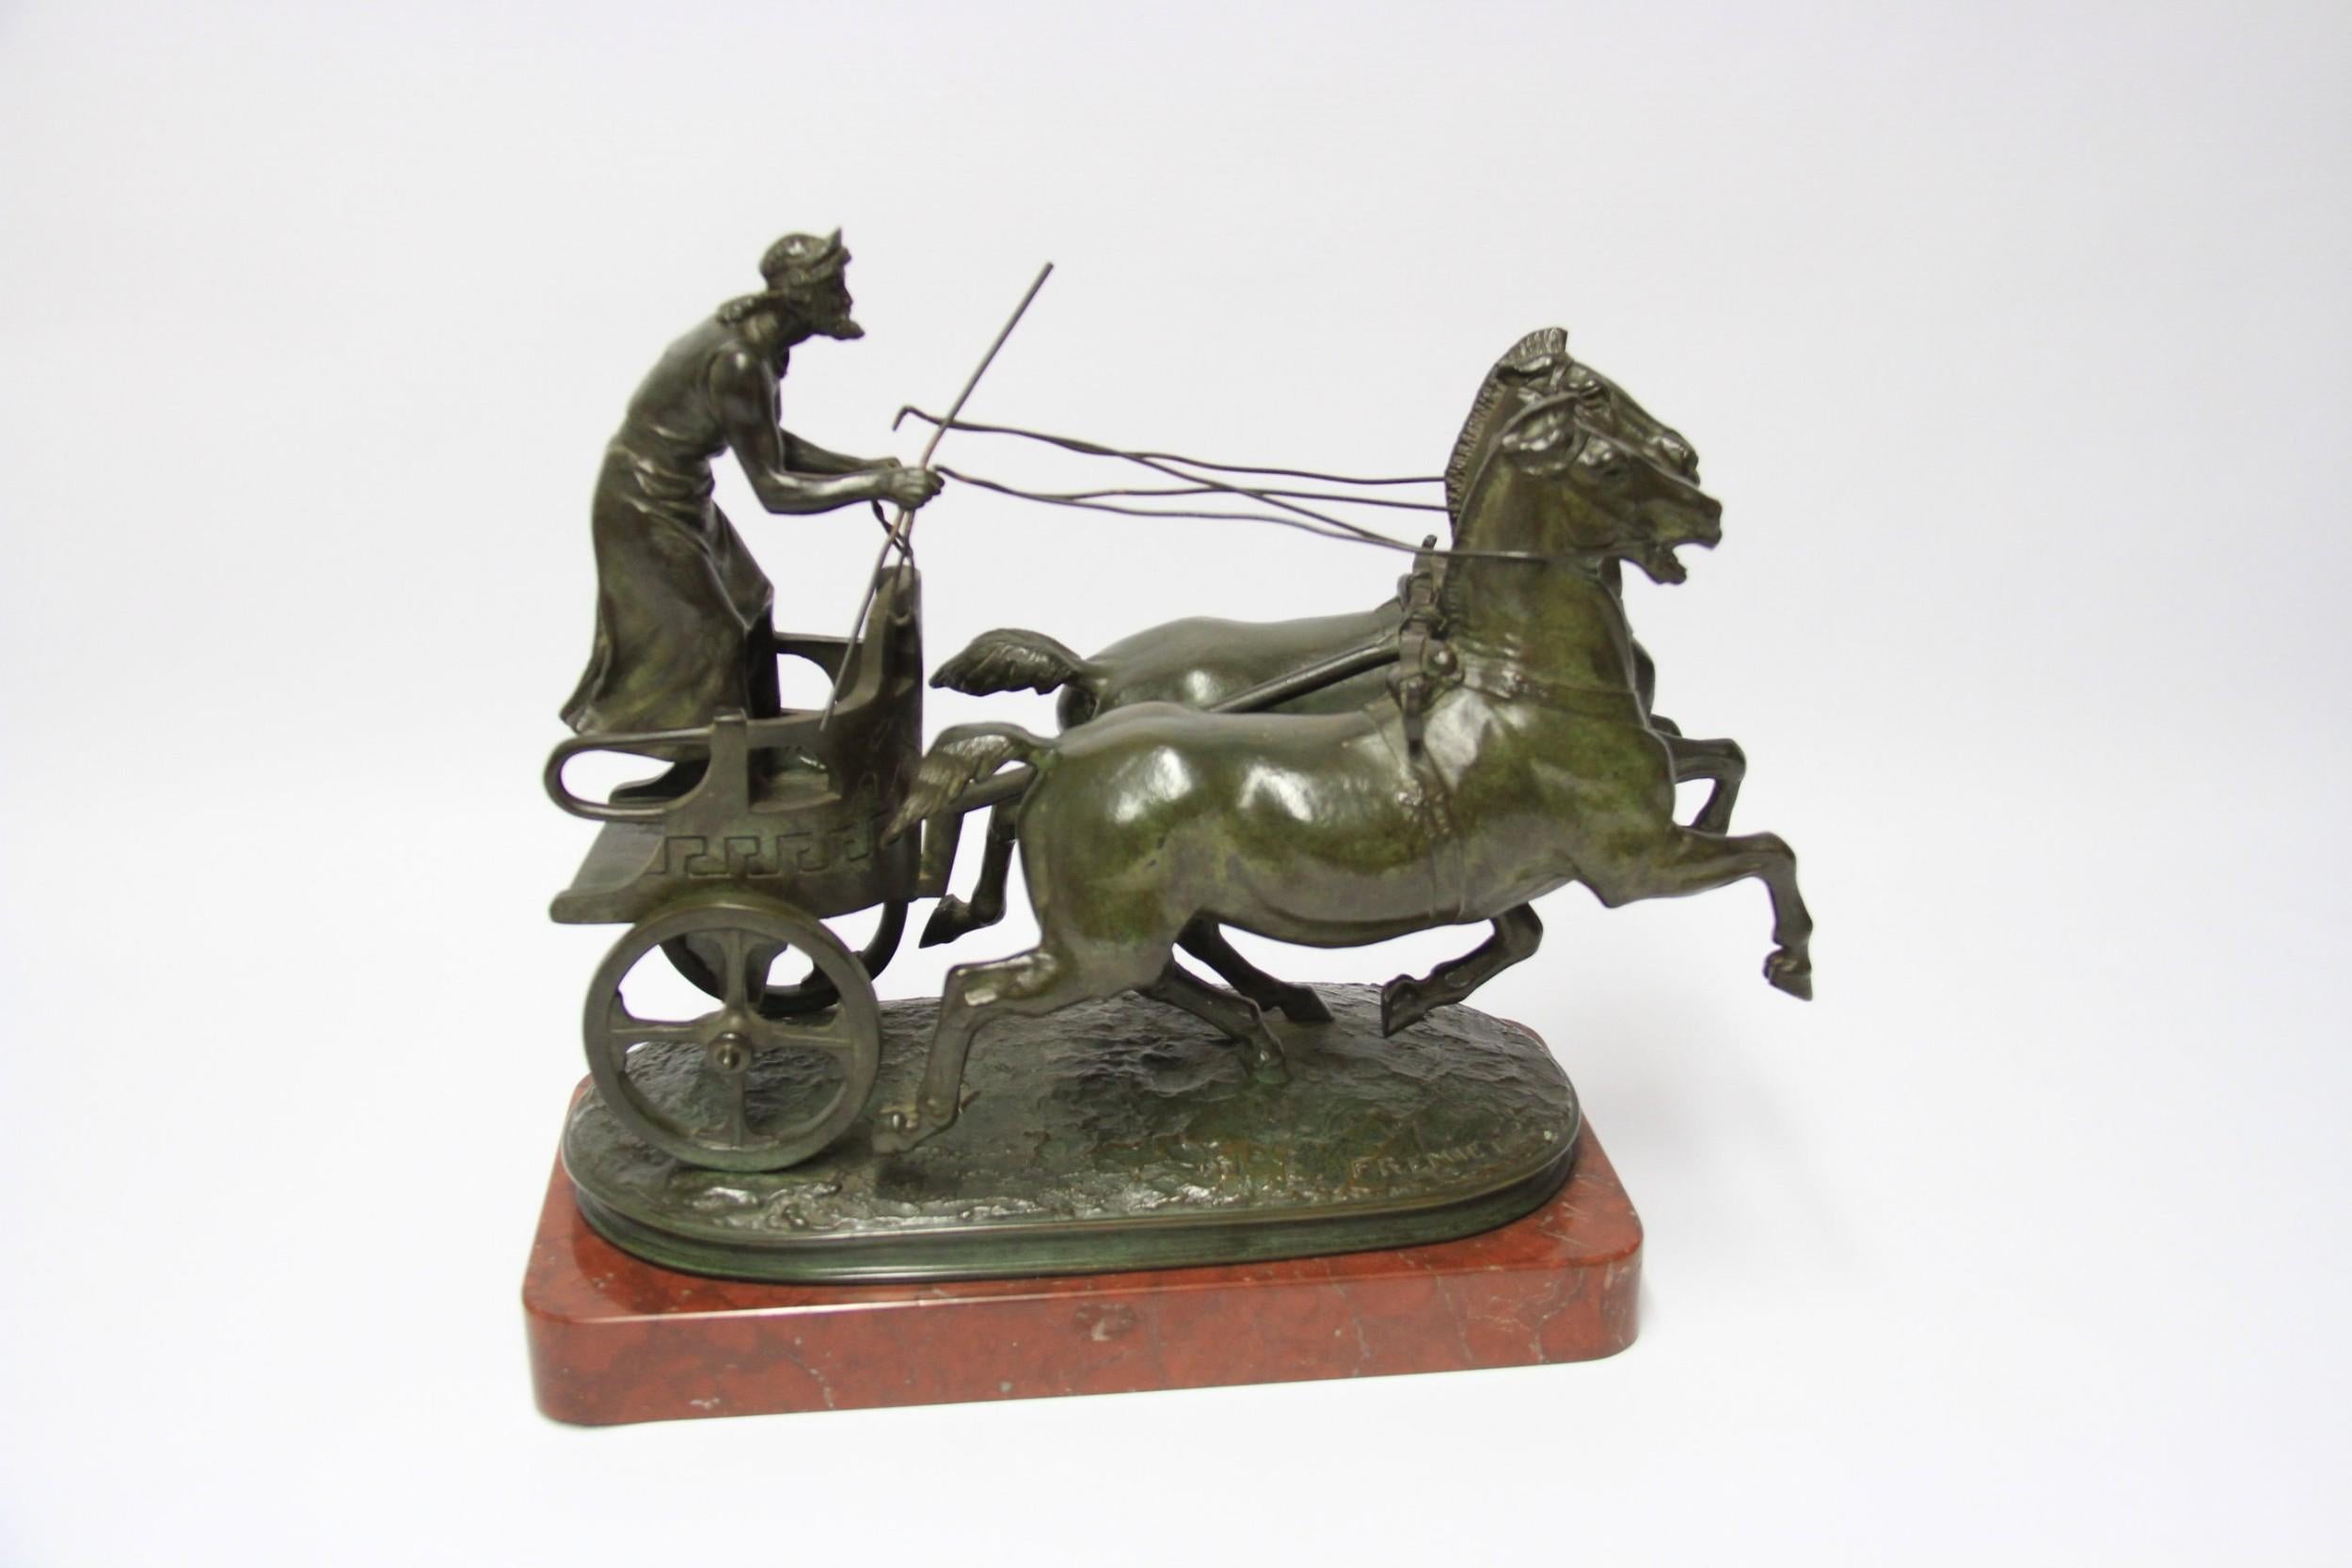 This large and decorative bronze sculpture is of a classical Grecian figure riding on a chariot pulled by two horses. It is mounted on a rouge griotte plinth. This piece was modelled by Emmanuel Fremiet, French, 1824-1910 and produced at the